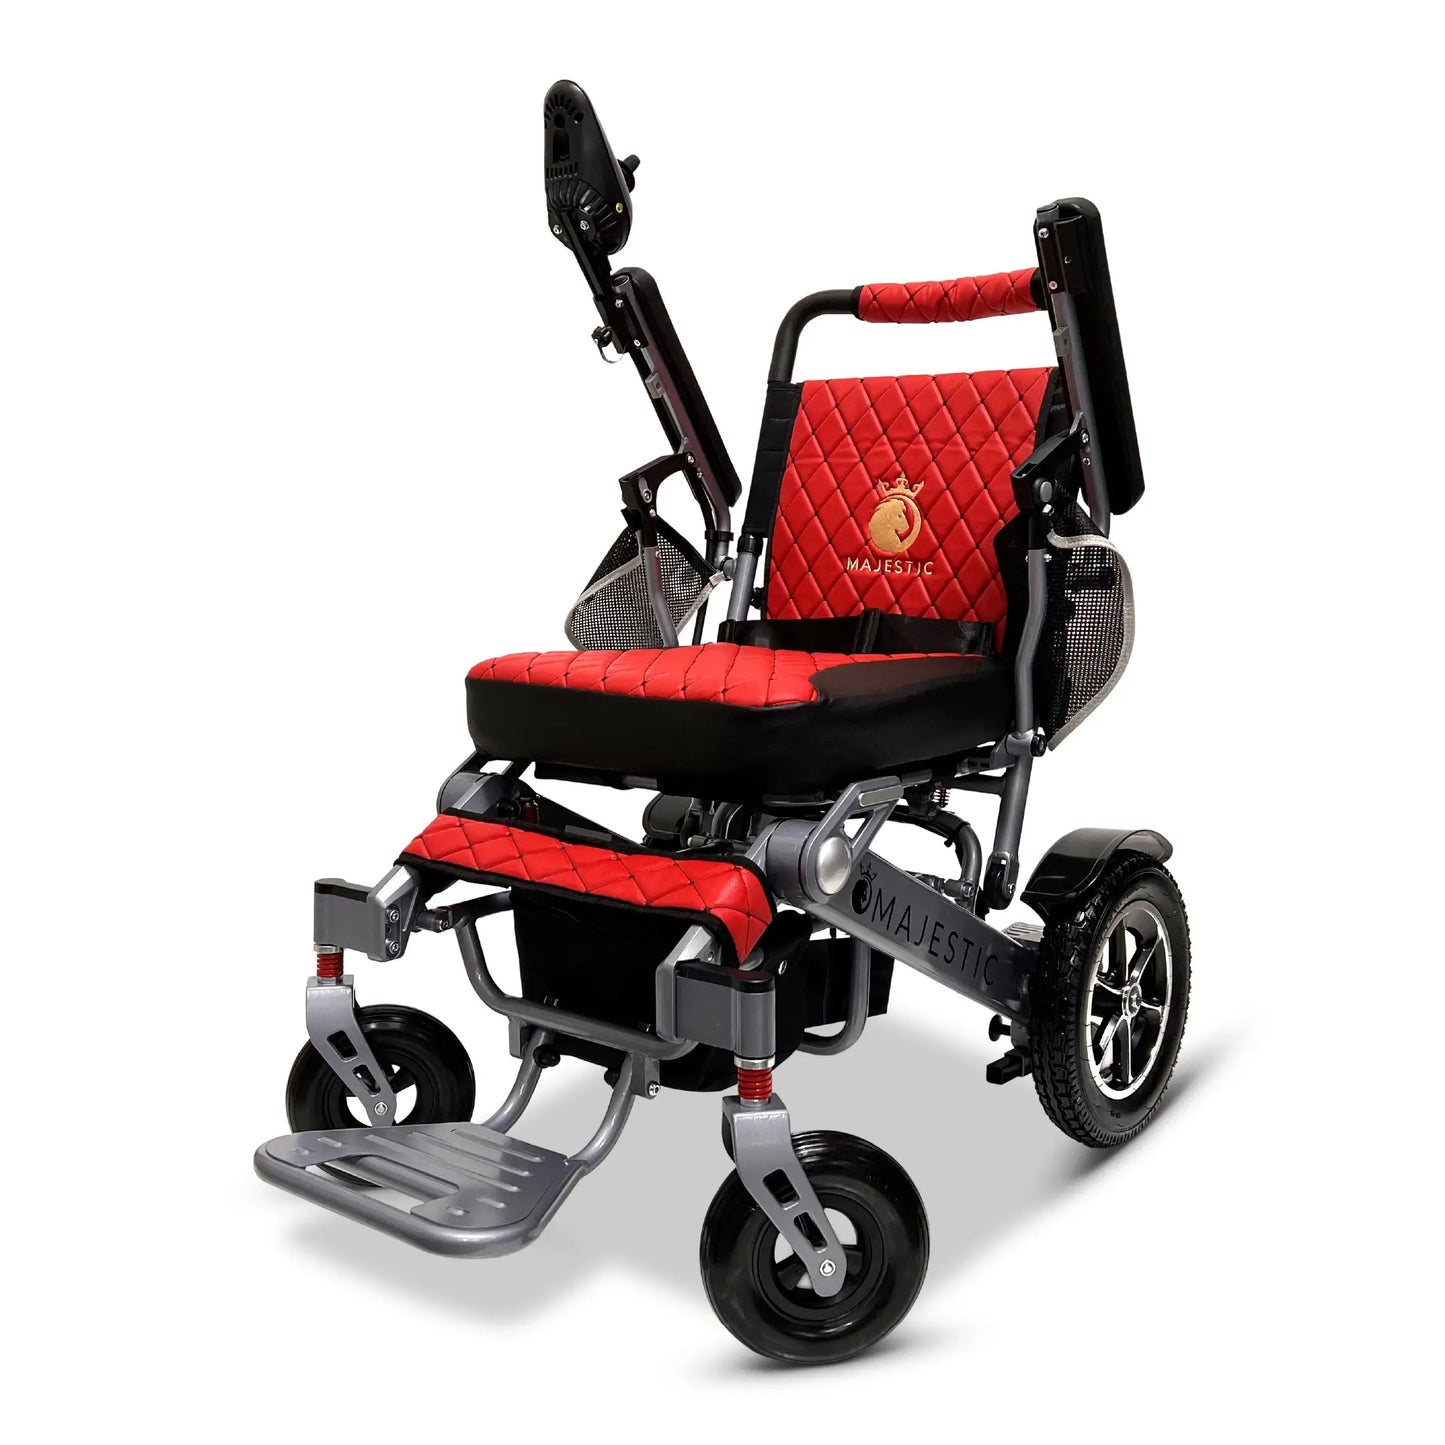 This electric wheelchair can be used at low speeds, in good road conditions, and can handle moderate slopes.